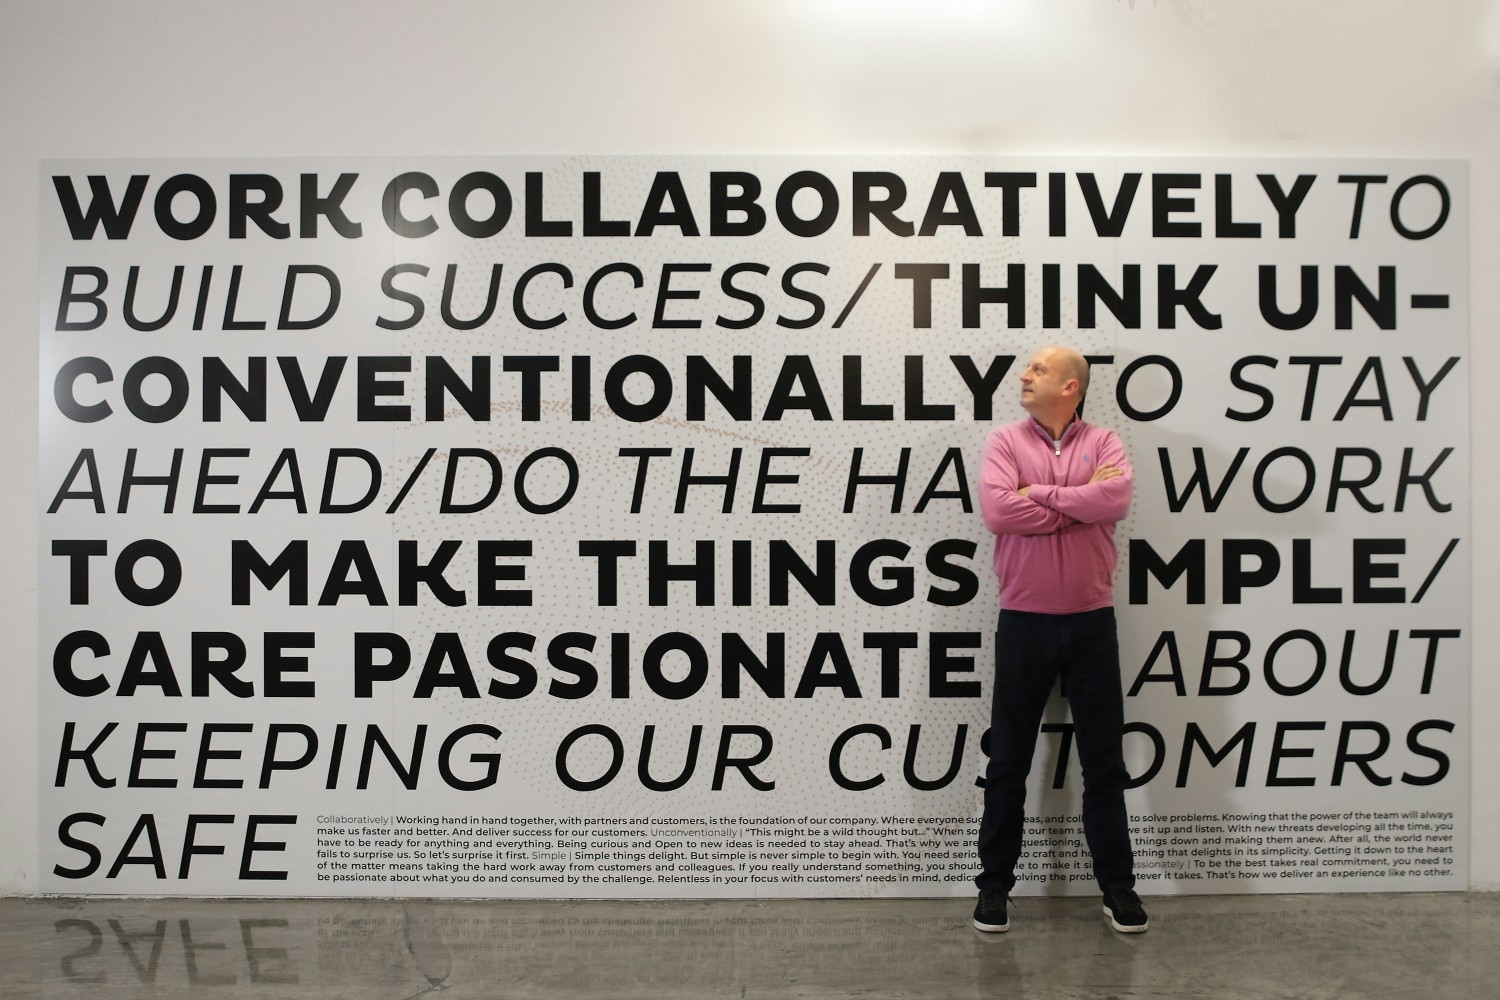 Our CEO, Geoff Haydon, in front of our Values wall